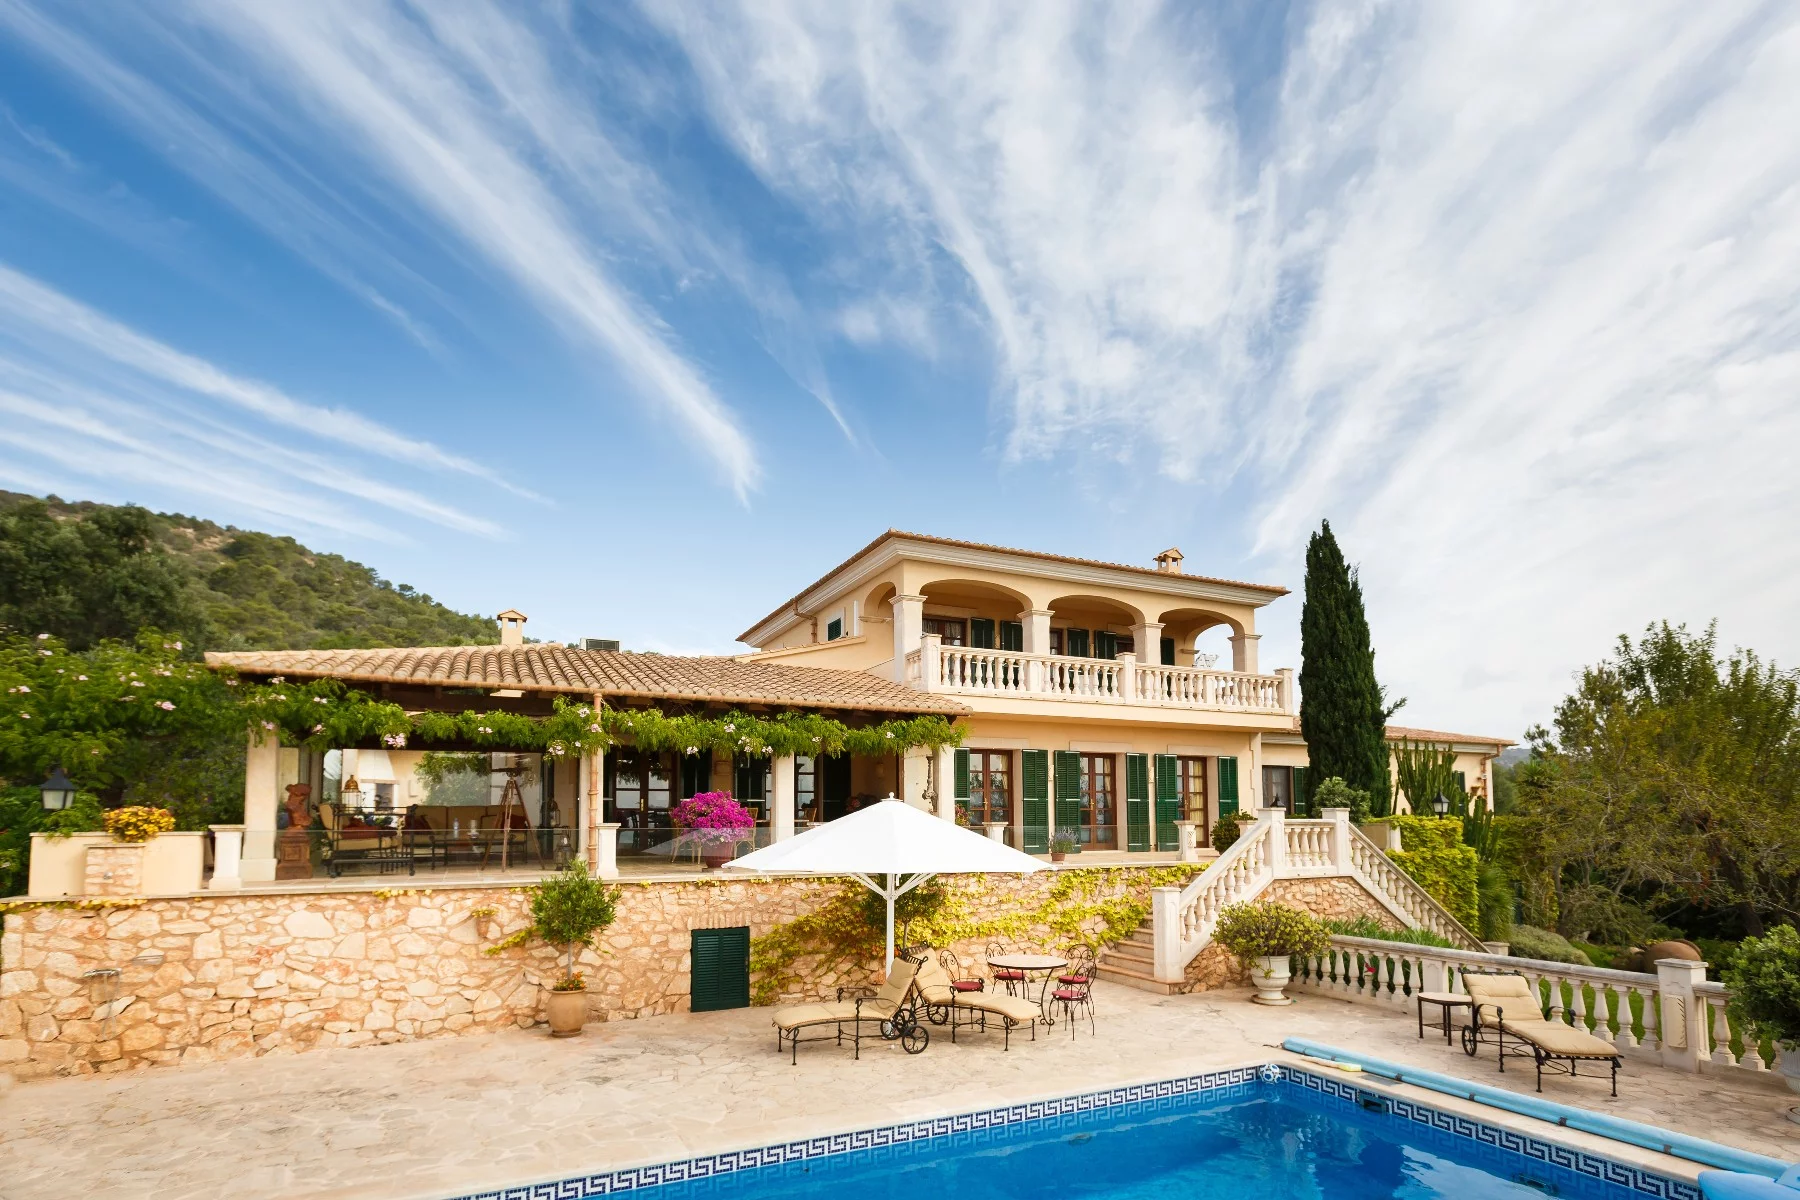 Villa in Spain with terrace and swimming pool